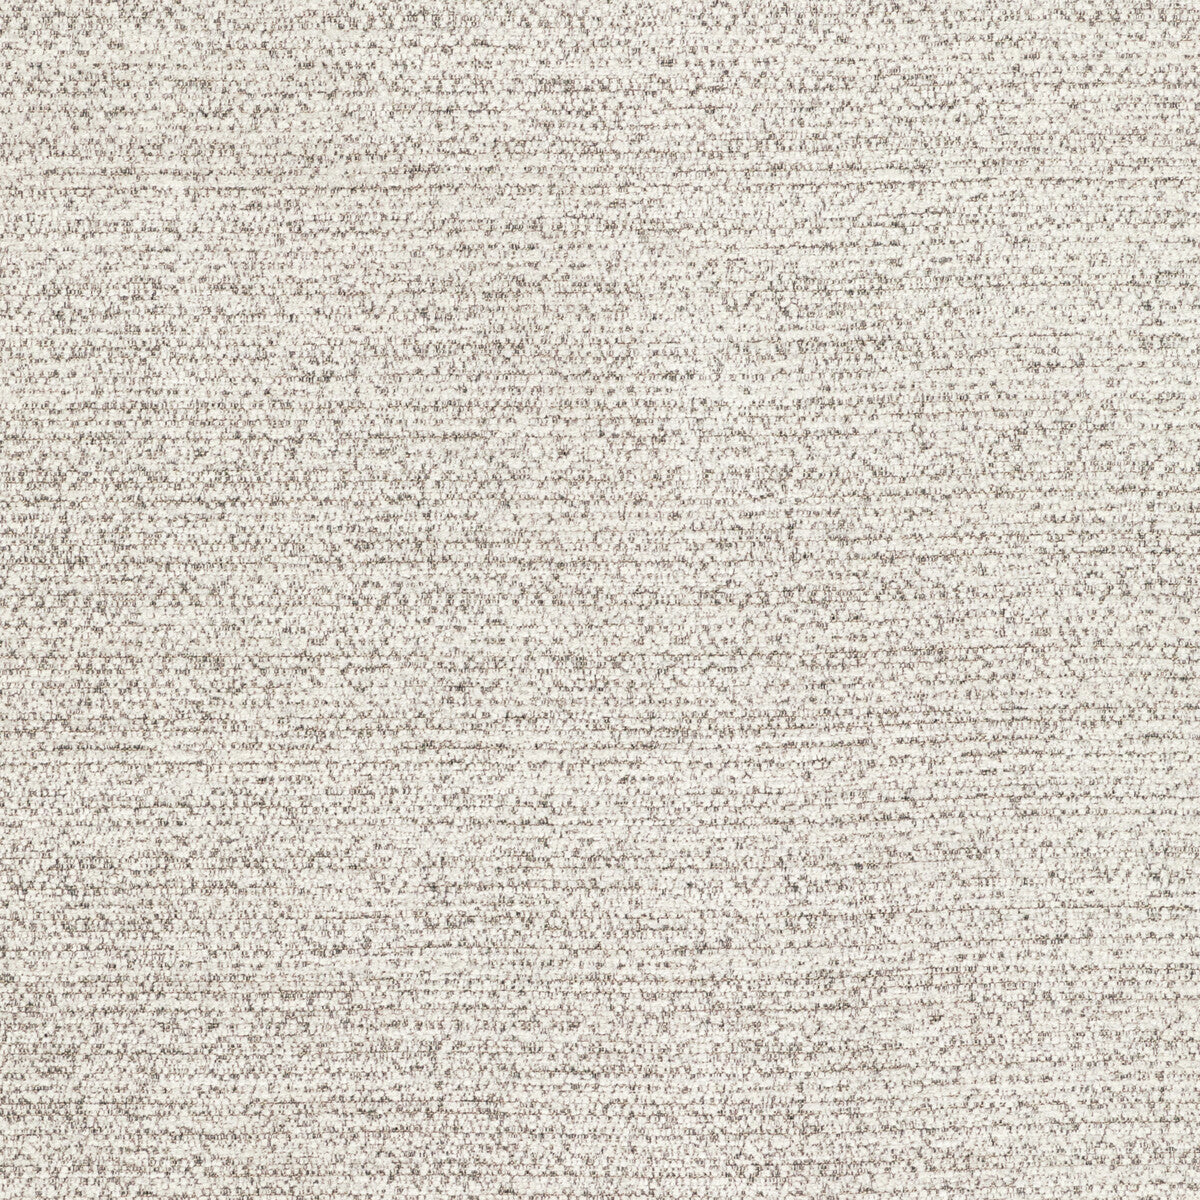 Kravet Couture fabric in 36608-1161 color - pattern 36608.1161.0 - by Kravet Couture in the Mabley Handler collection